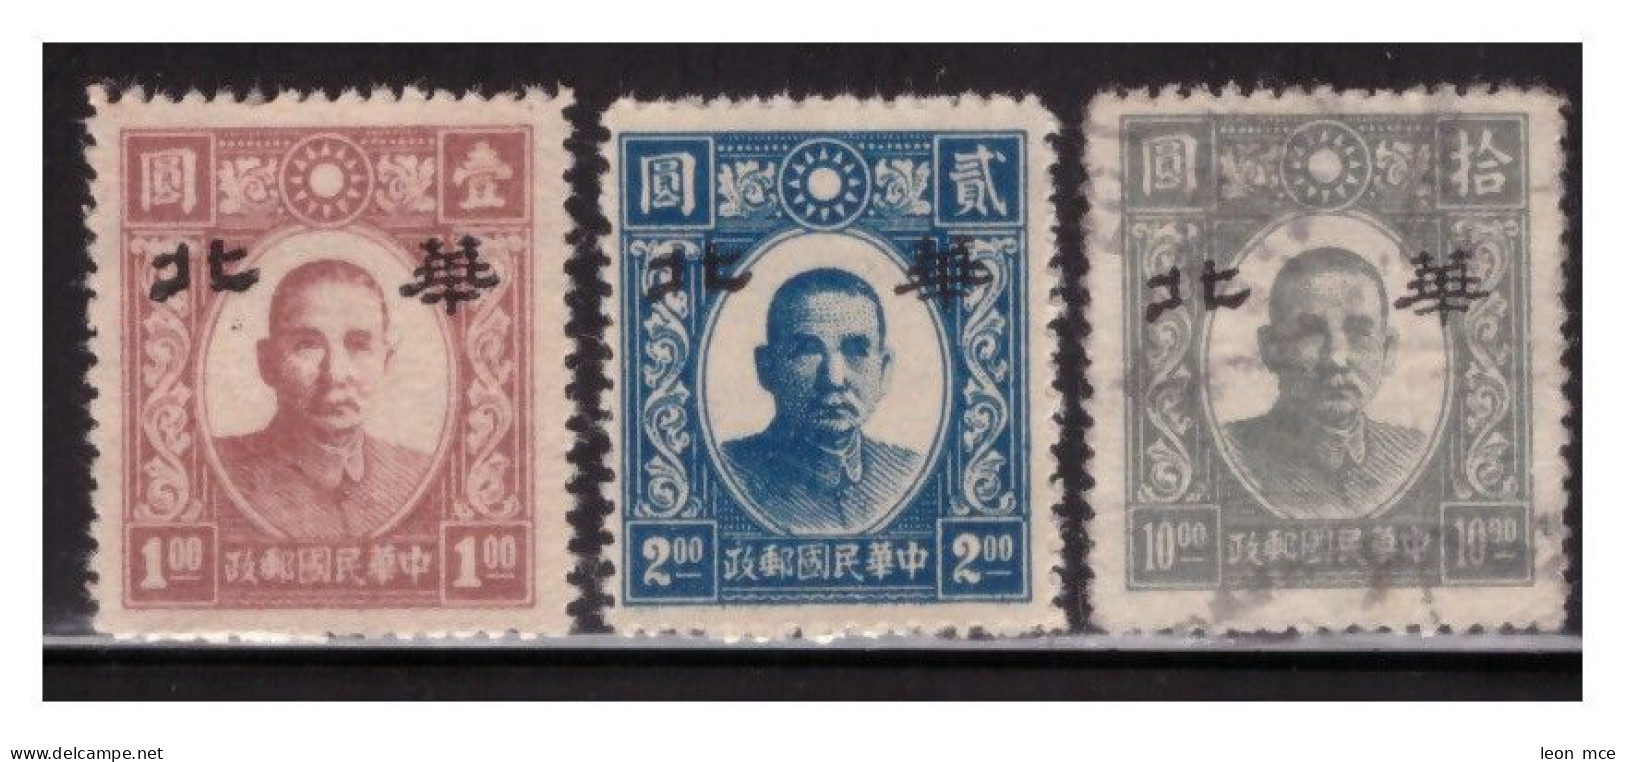 1945 CHINA NORTH "HWA PEI" Dr. SUN YAT-SEN, WITHOUT Overprint Are Proofs STAMPS (3) - 1941-45 Noord-China